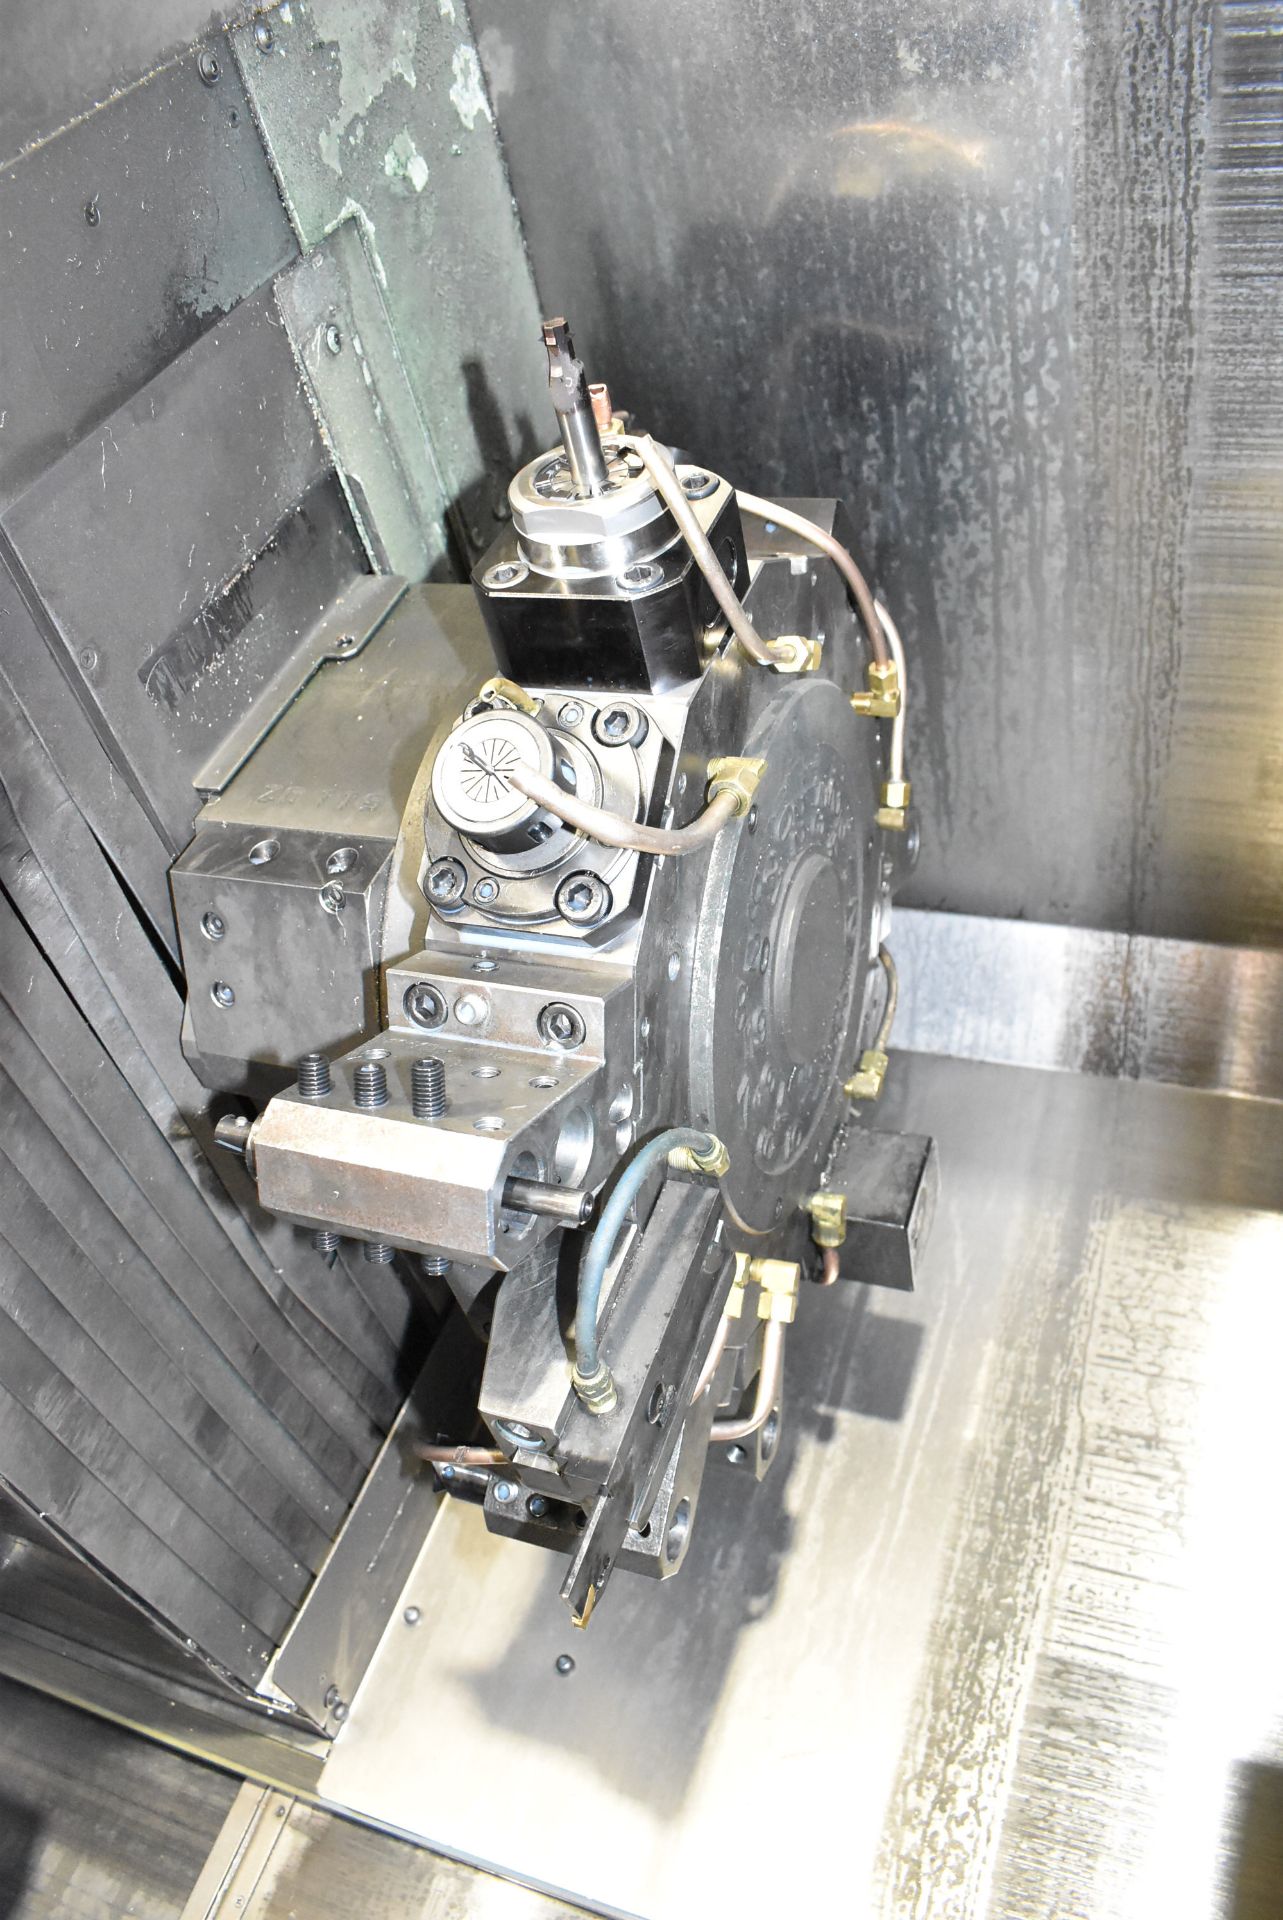 NAKAMURA-TOME WT-250 MULTI-AXIS OPPOSED SPINDLE AND TWIN TURRET CNC MULTI-TASKING CENTER WITH - Image 3 of 9